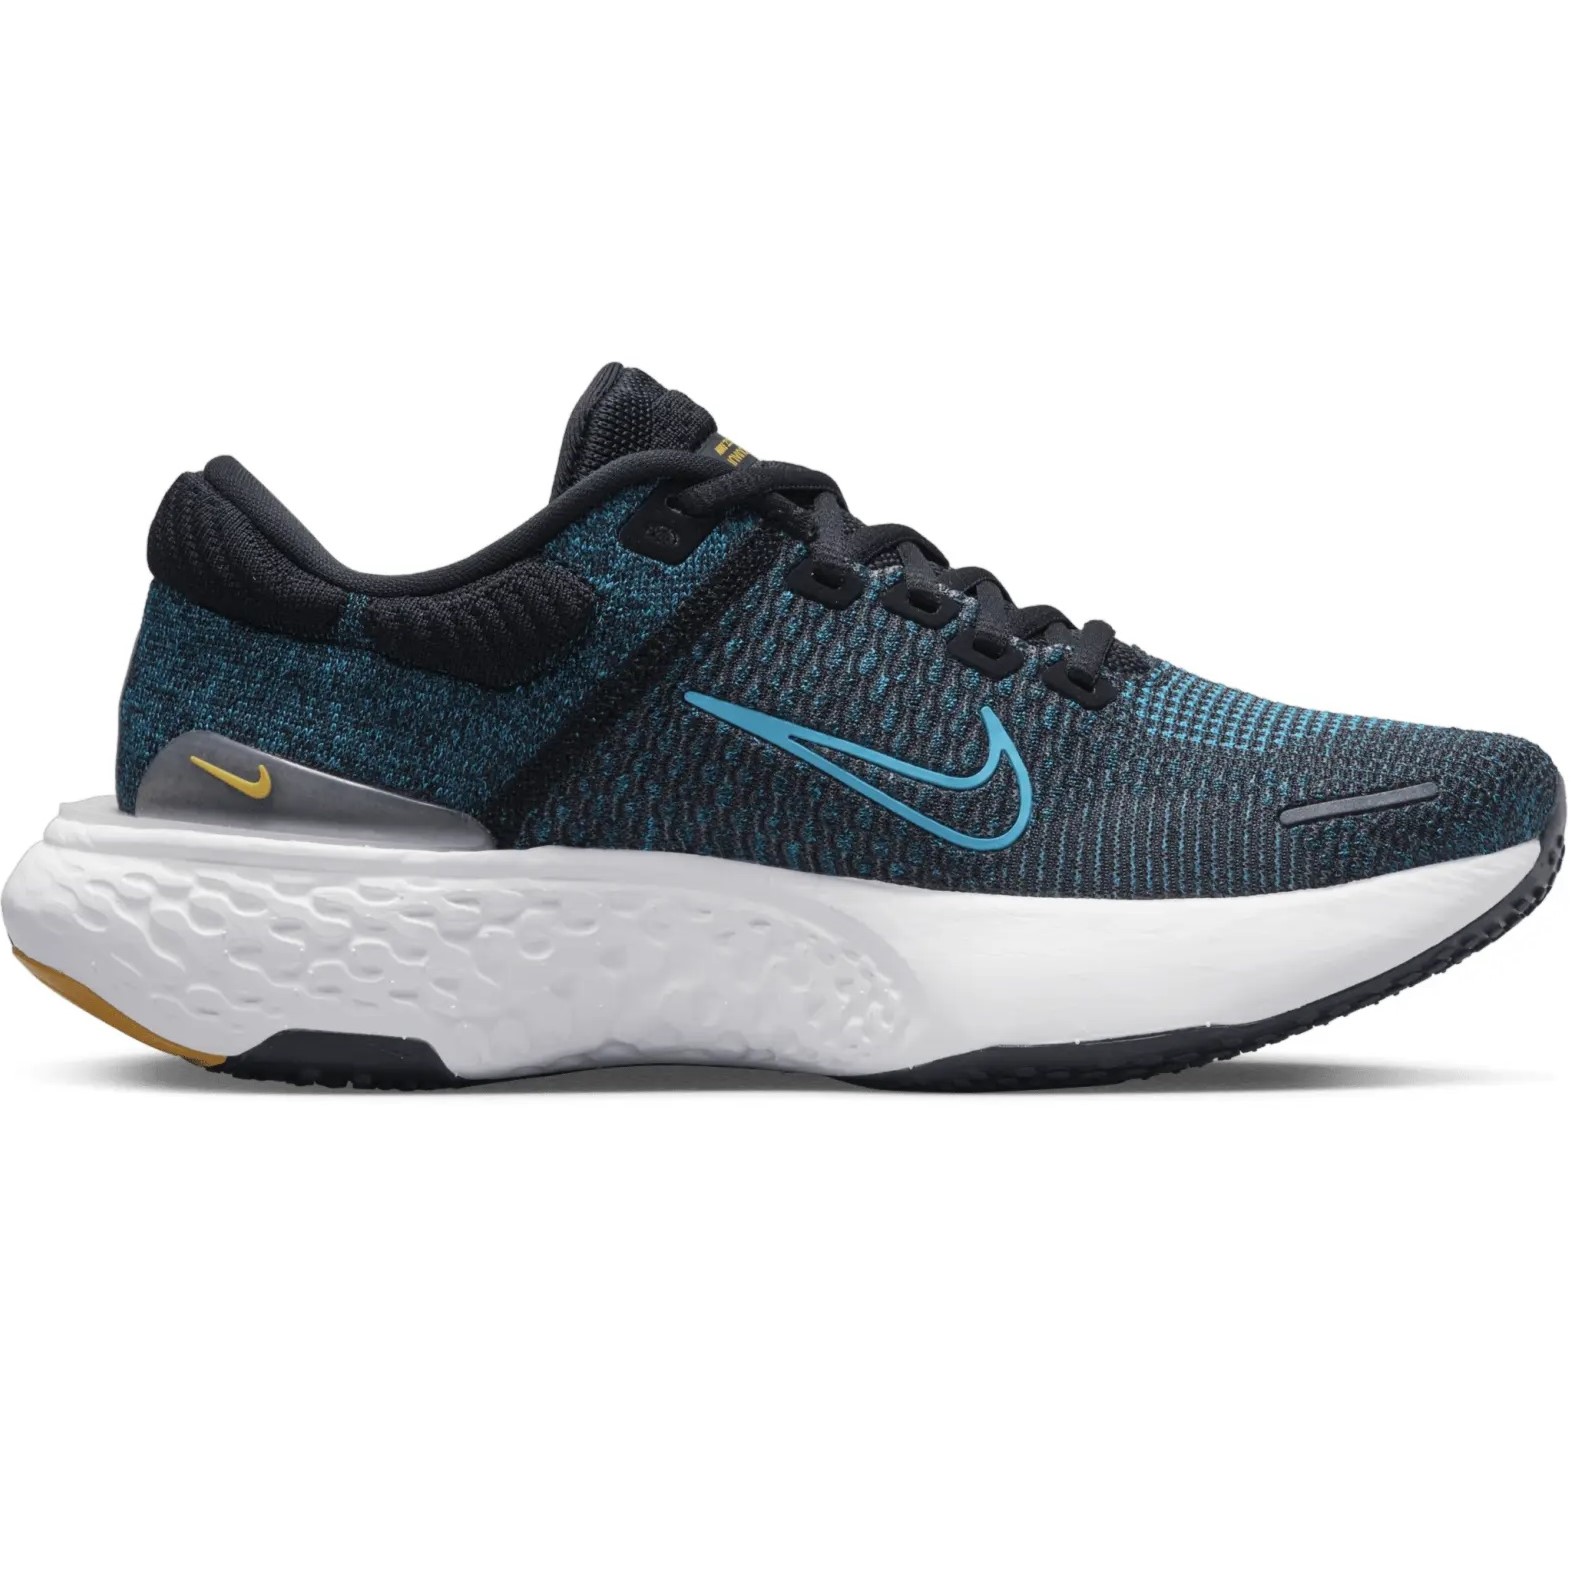 GIÀY THỂ THAO NIKE NAM ZOOMX INVINCIBLE RUN FLYKNIT 2 BLACK CHLORINE BLUE WHITE DH5425-003 9